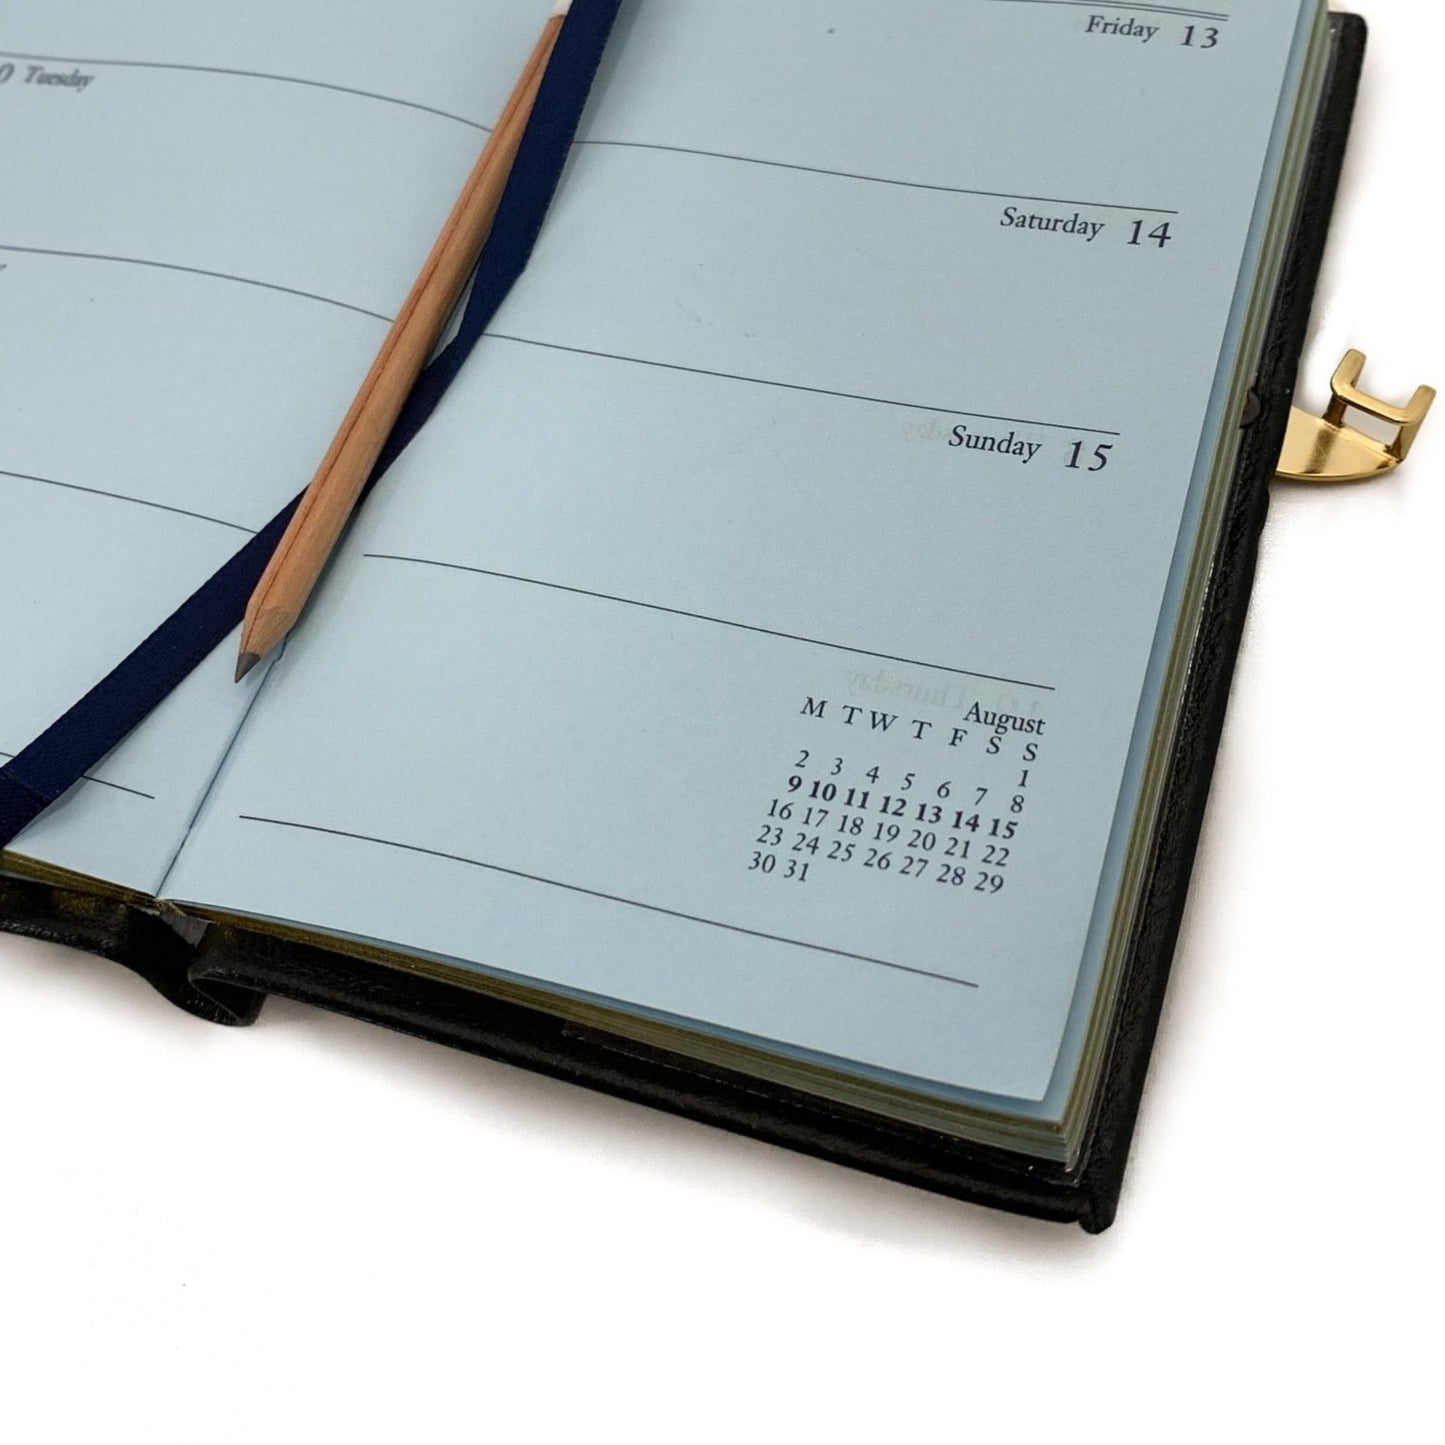 YEAR 2022 CROSSGRAIN Leather Pocket Calendar Book | 5 x 3" | Pencil with Gold Clasp | D753LJC